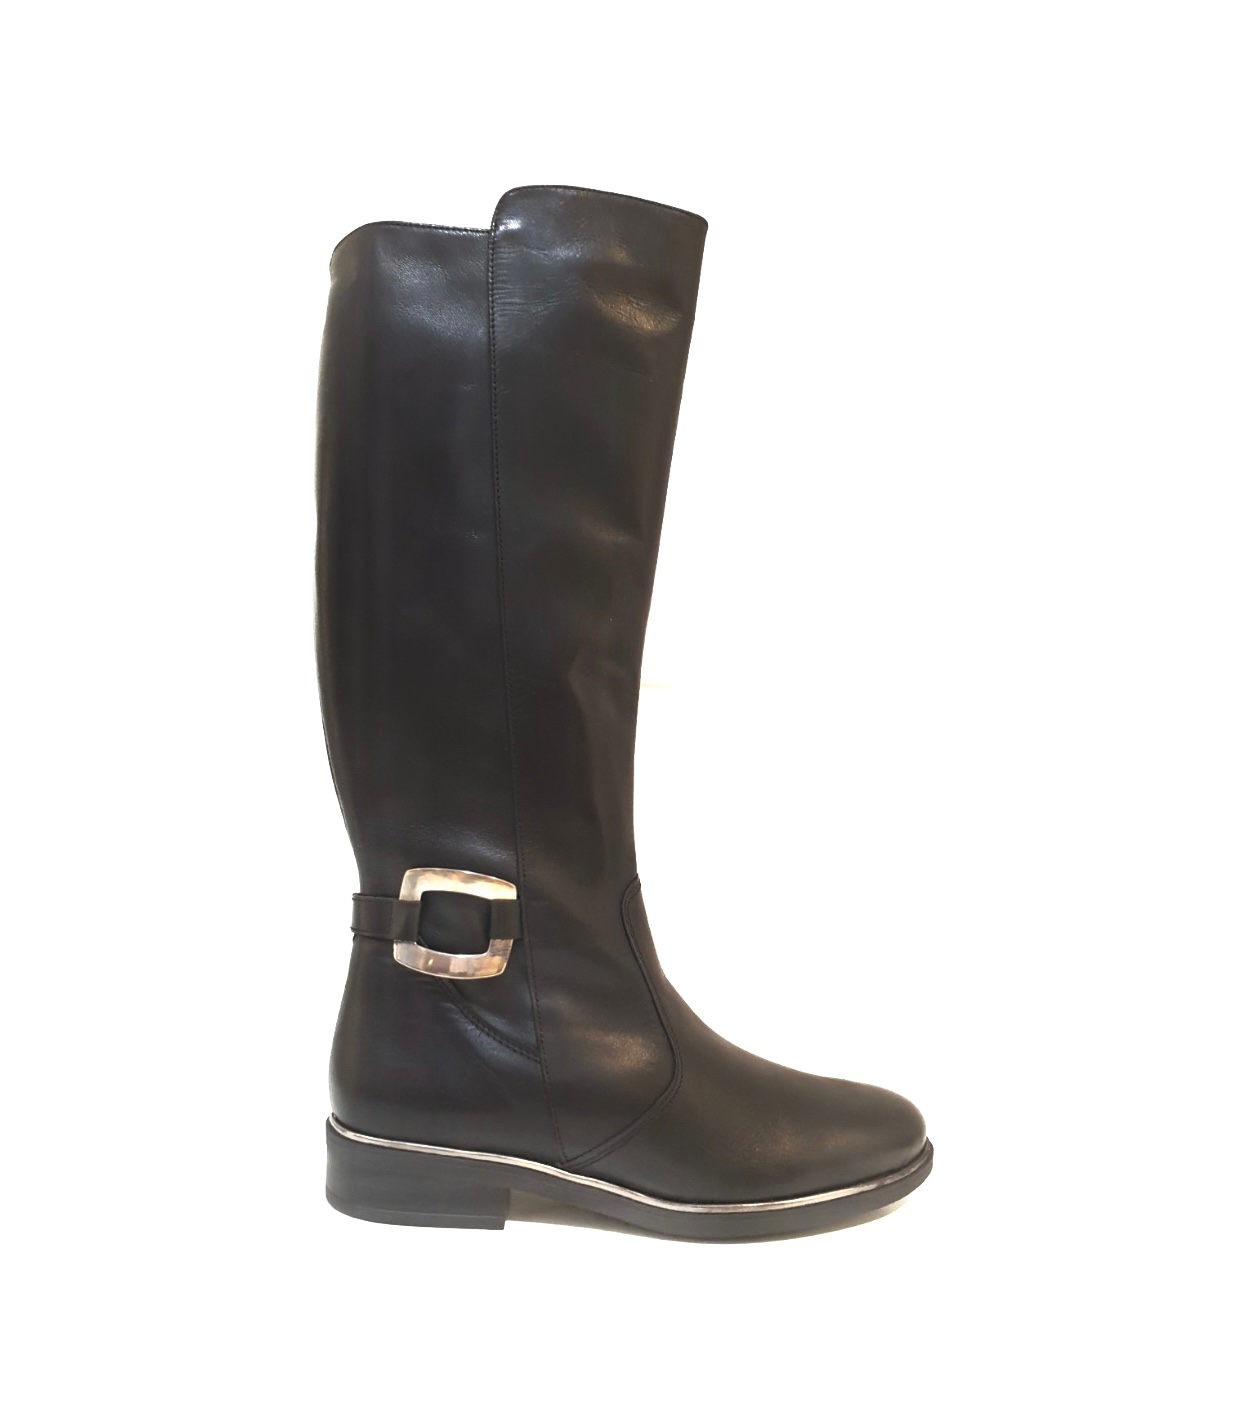 Old Florence 31286 Tamponato Nero Black Zip Knee High Boot Made In Italy